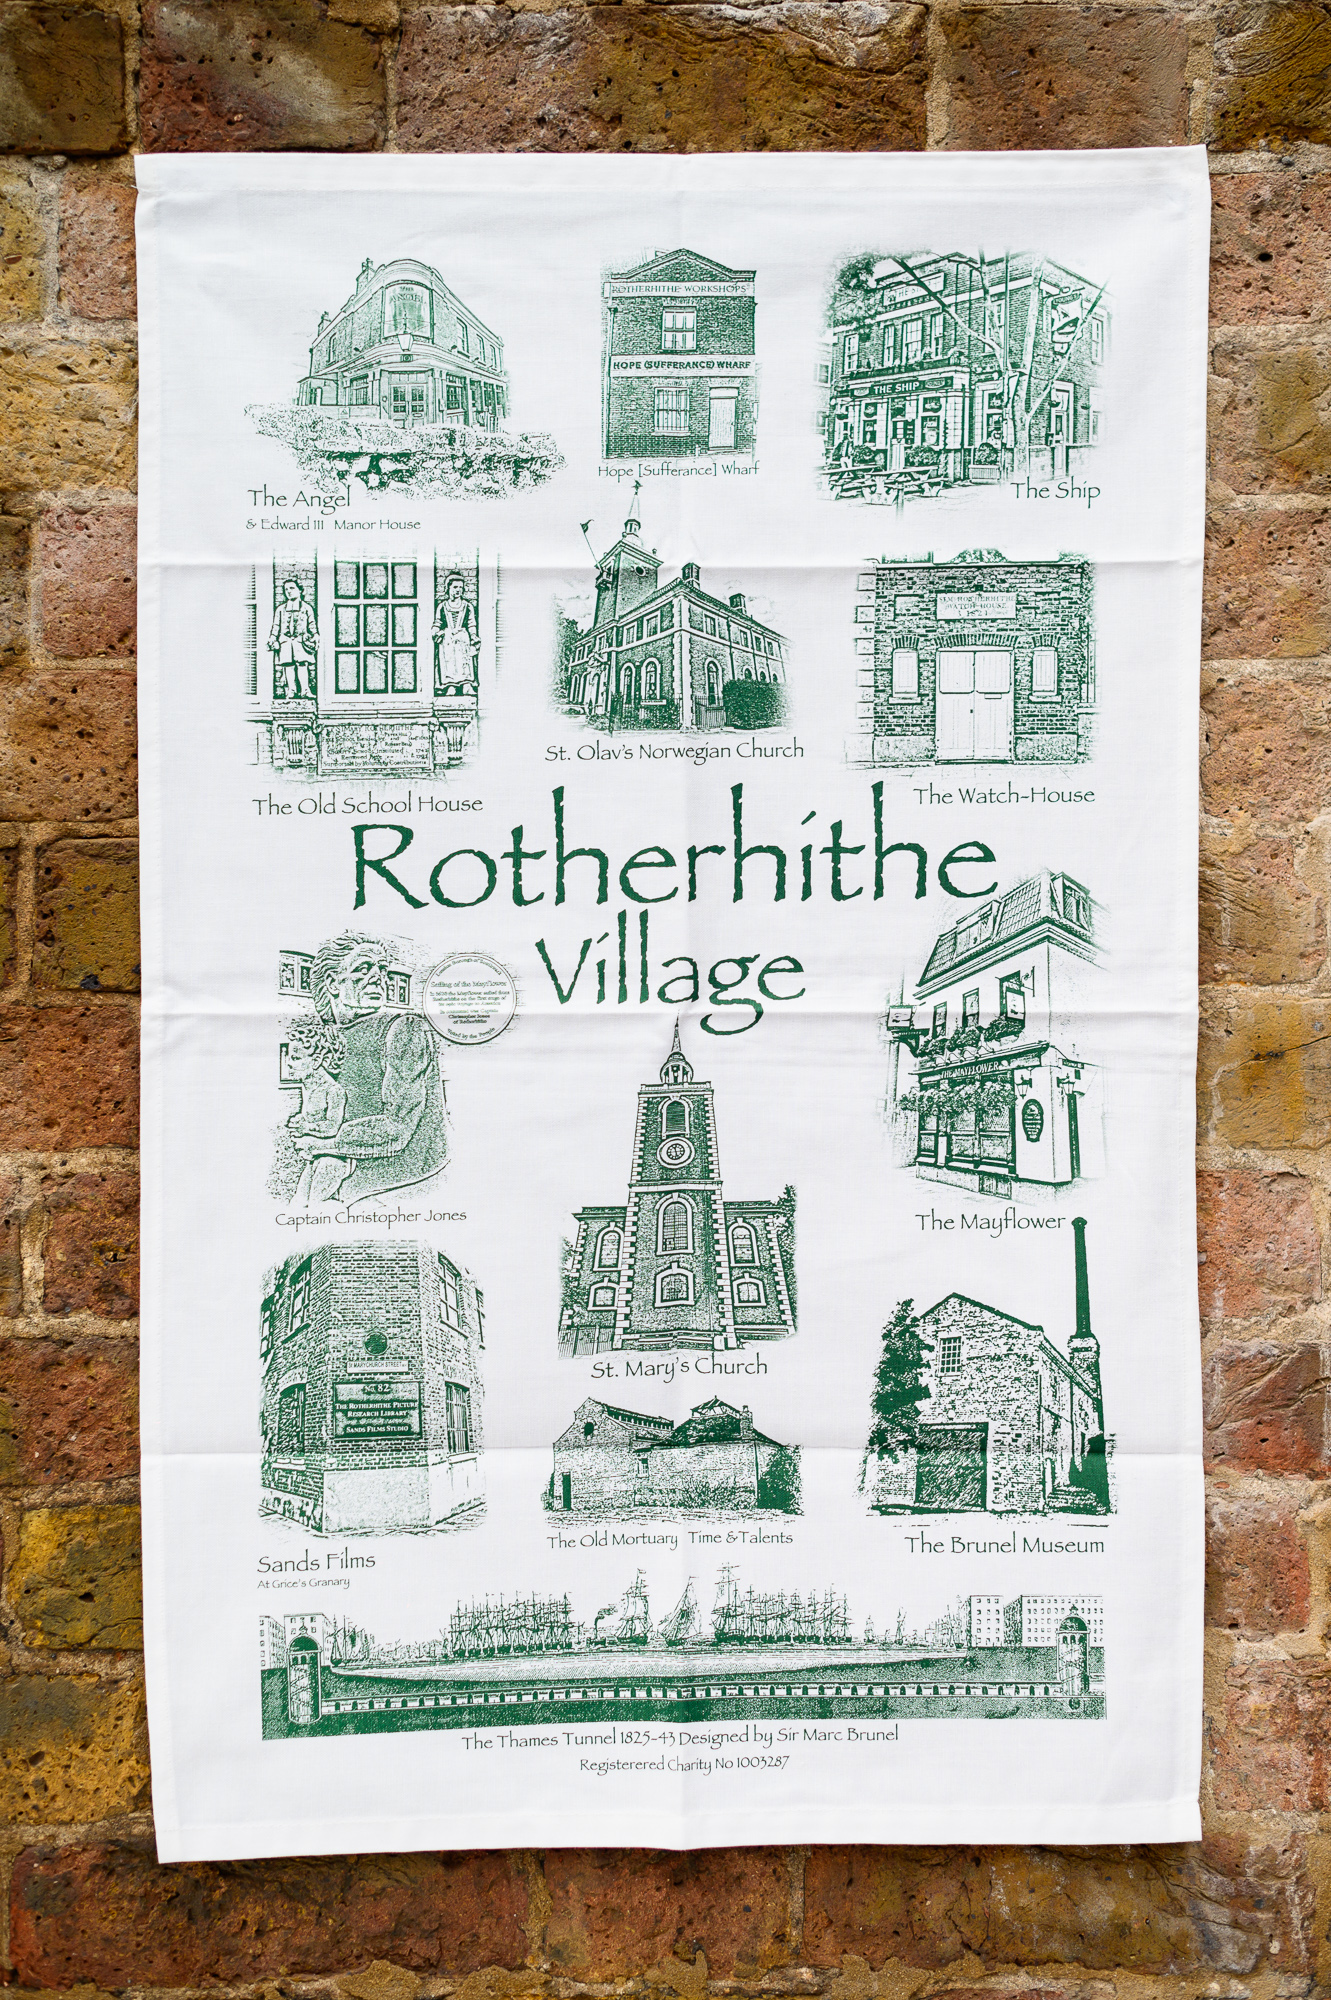 Tea Towel decorated with a selection of historic Rotherhithe buildings, green on white, including the Thames Tunnel at the bottom.